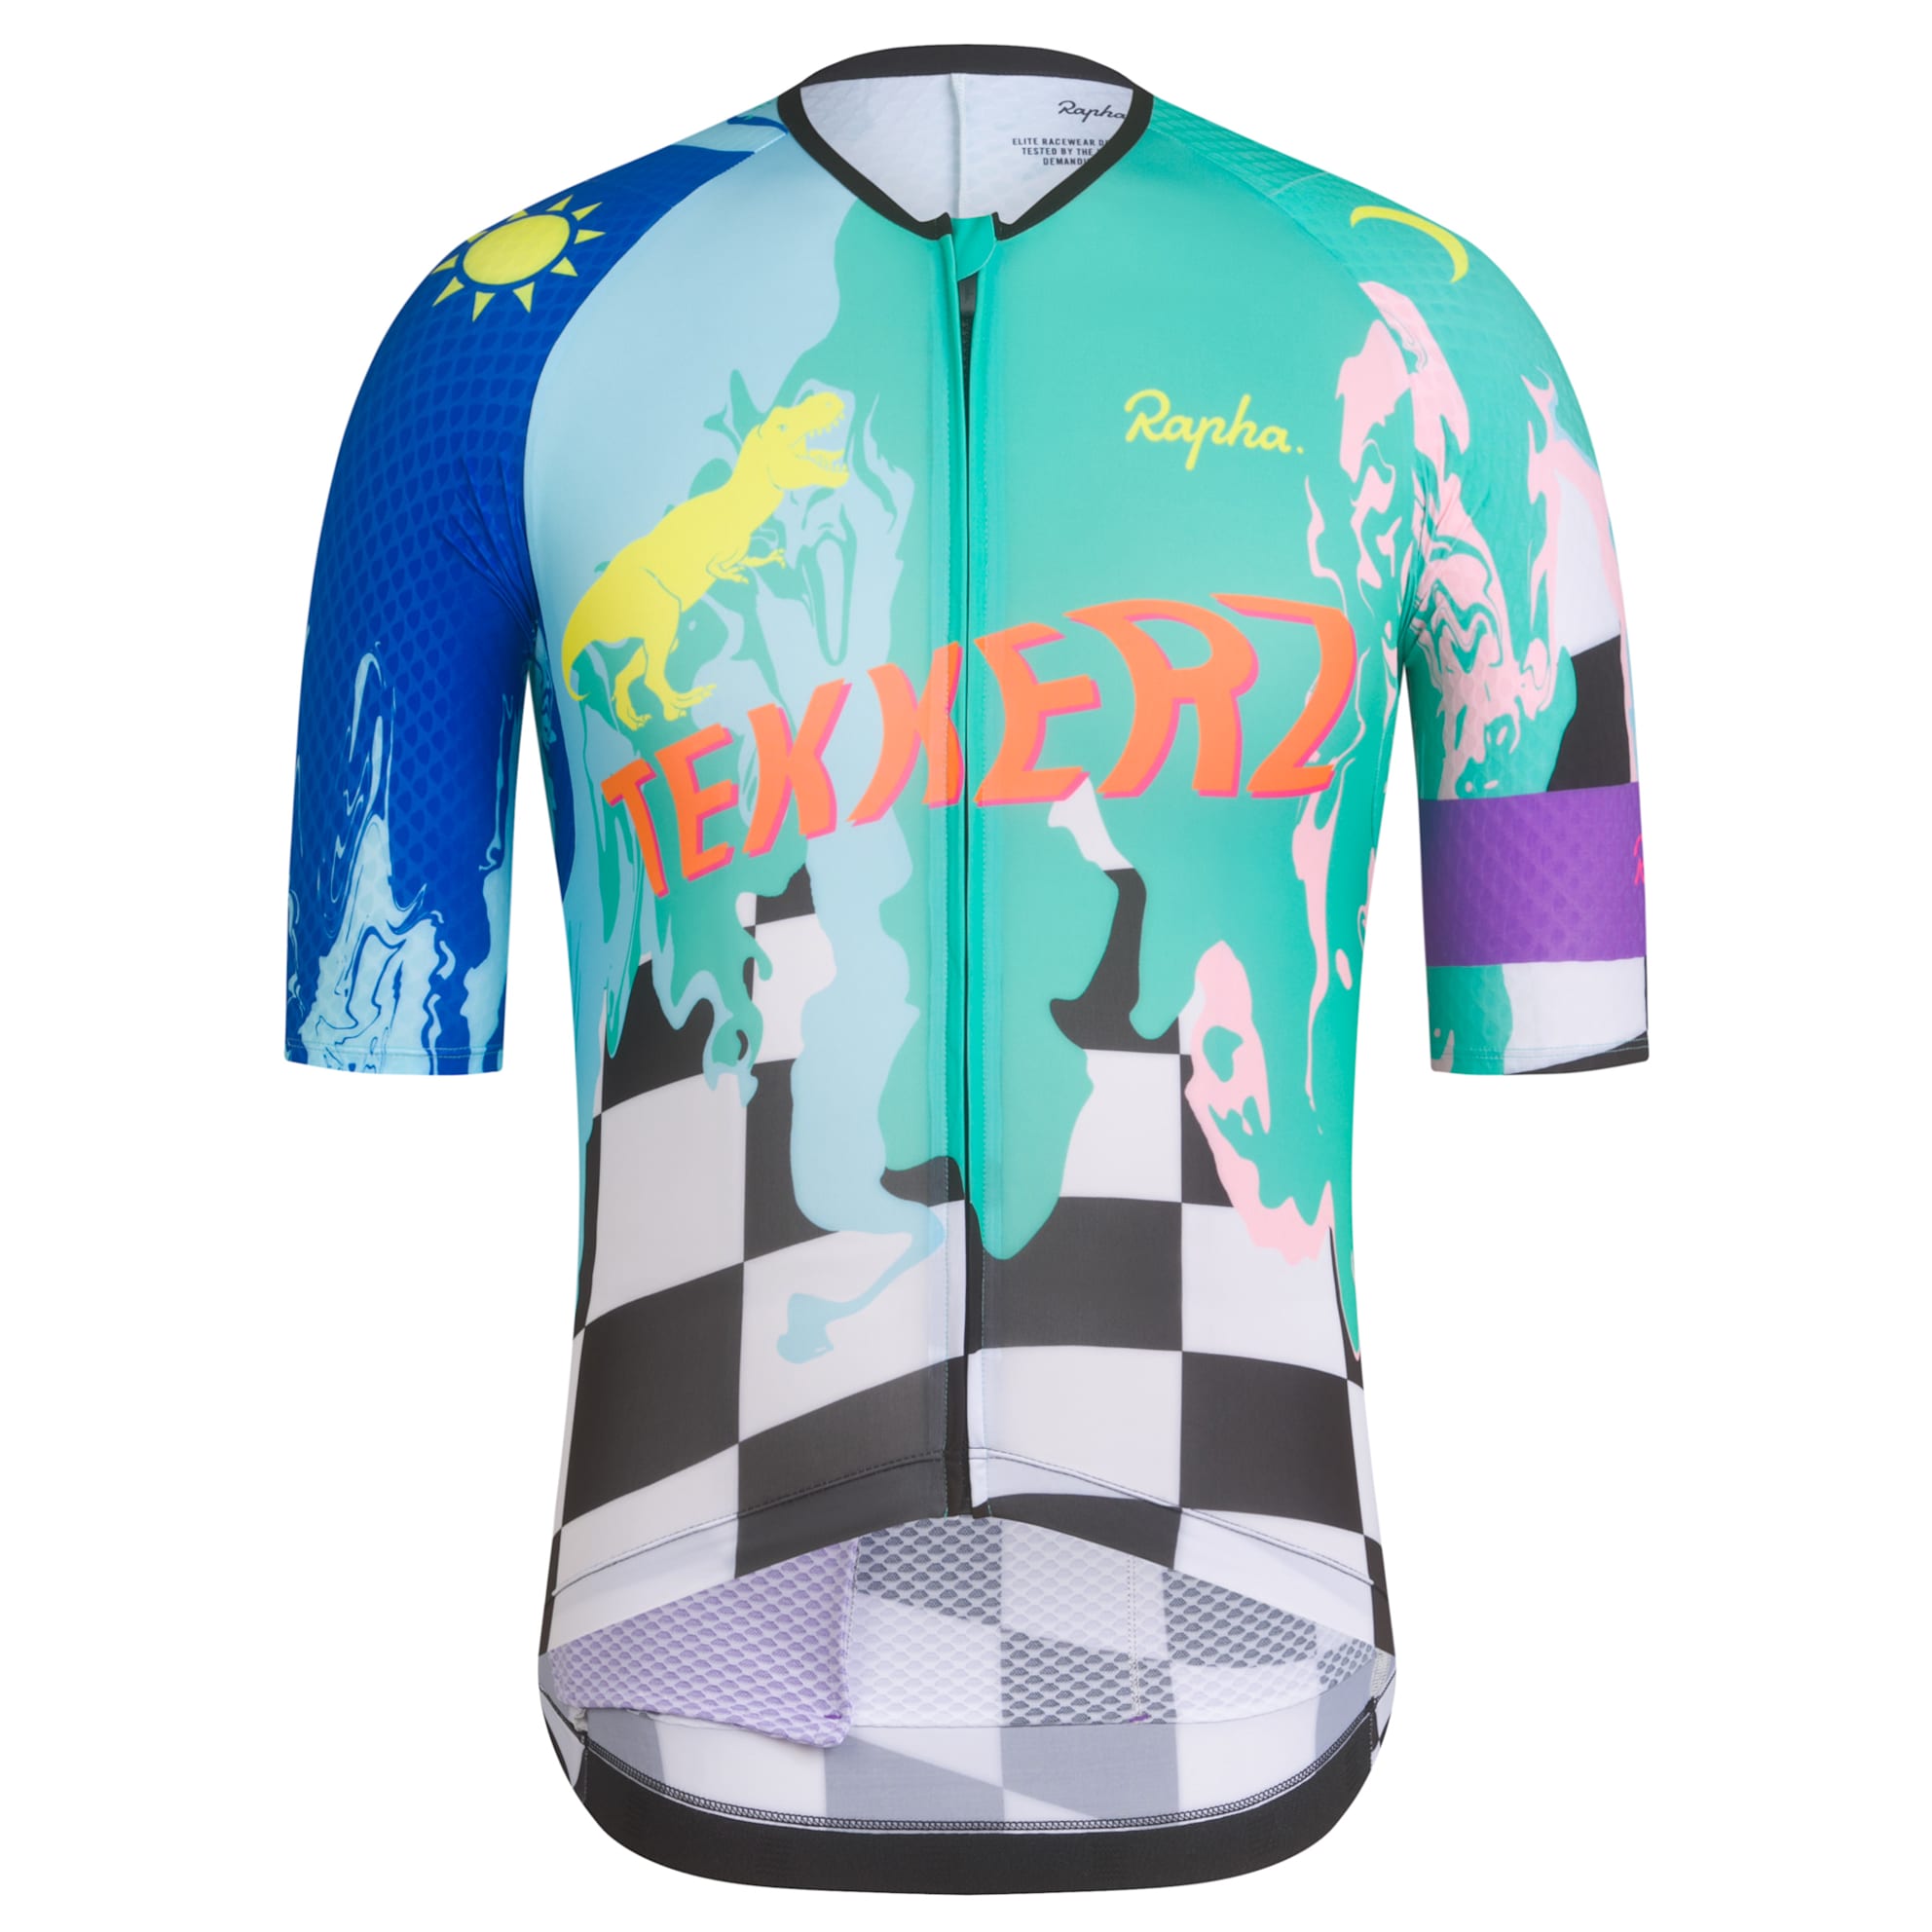 Men's Cycling Jerseys, Clothing & Accessories | Rapha Site